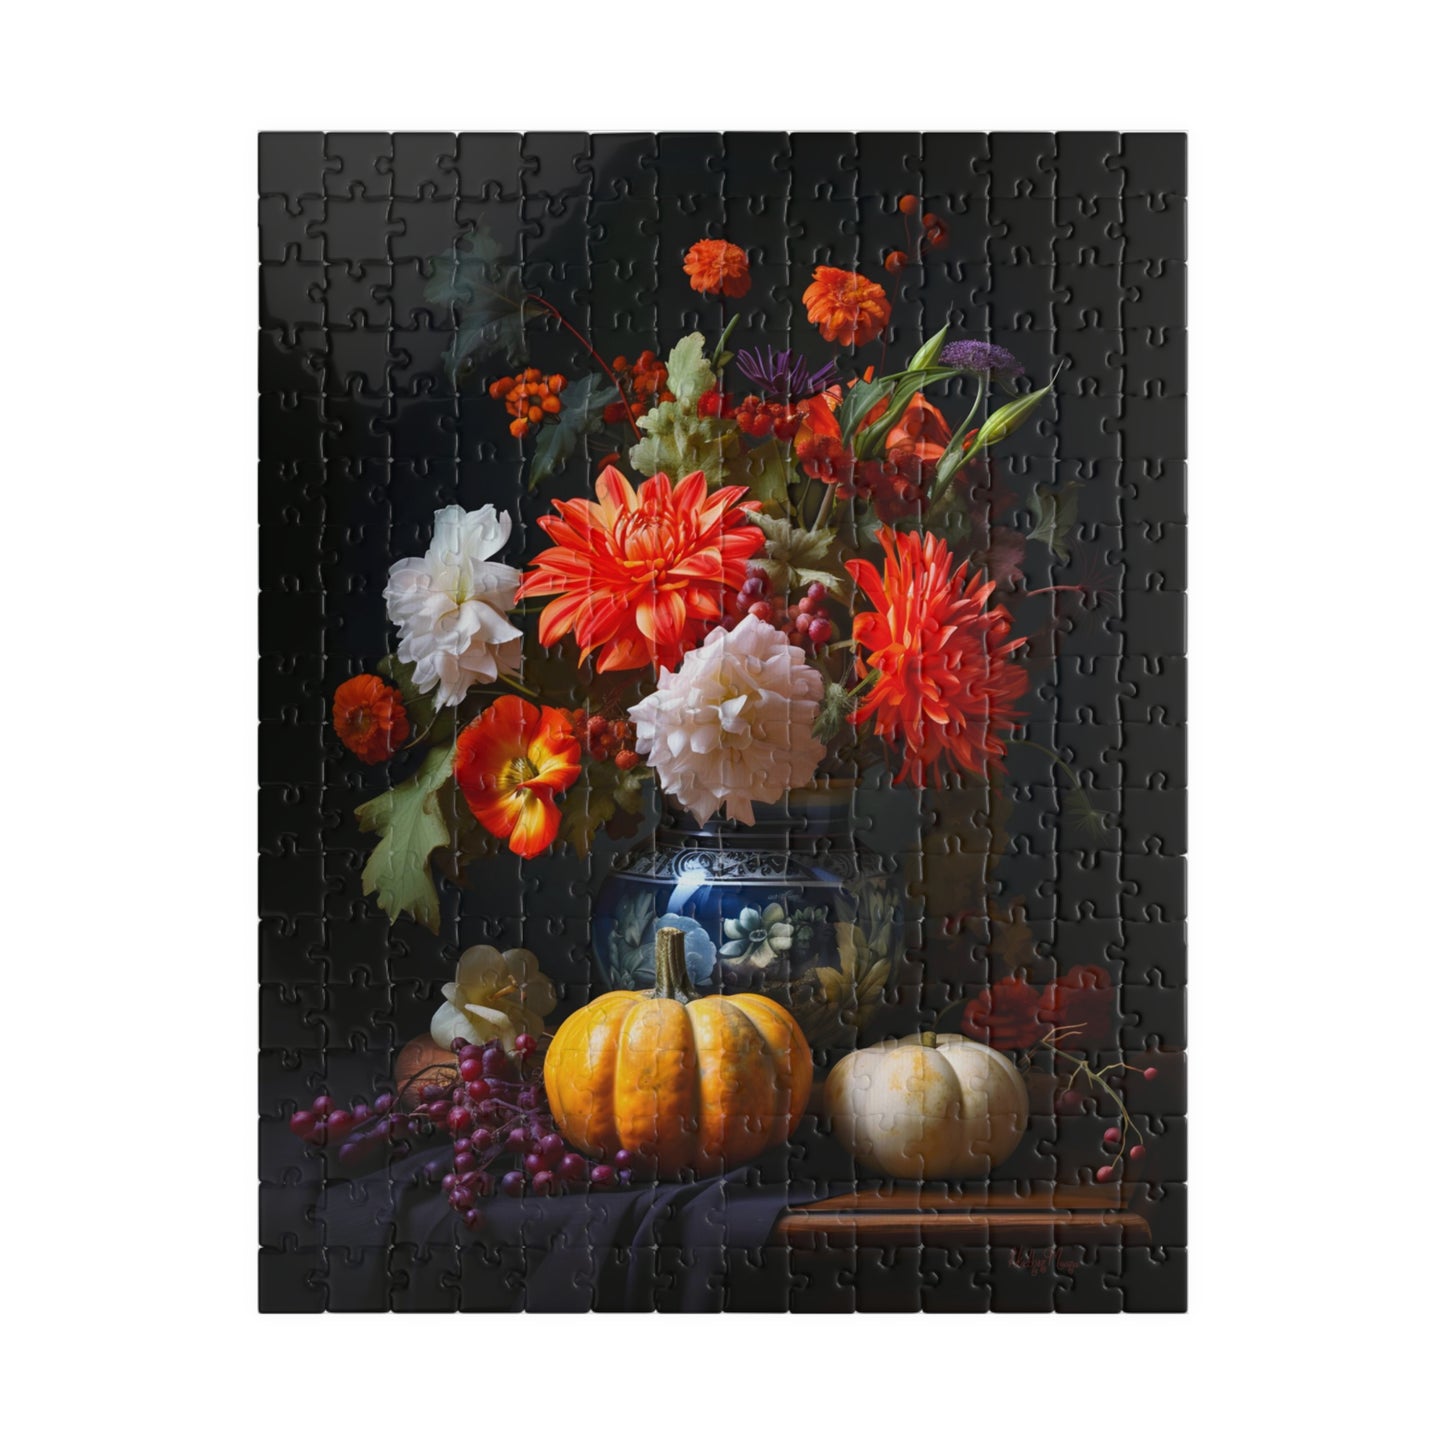 Flower Bouquet with Pumpkins and Fruit | Jigsaw Puzzle